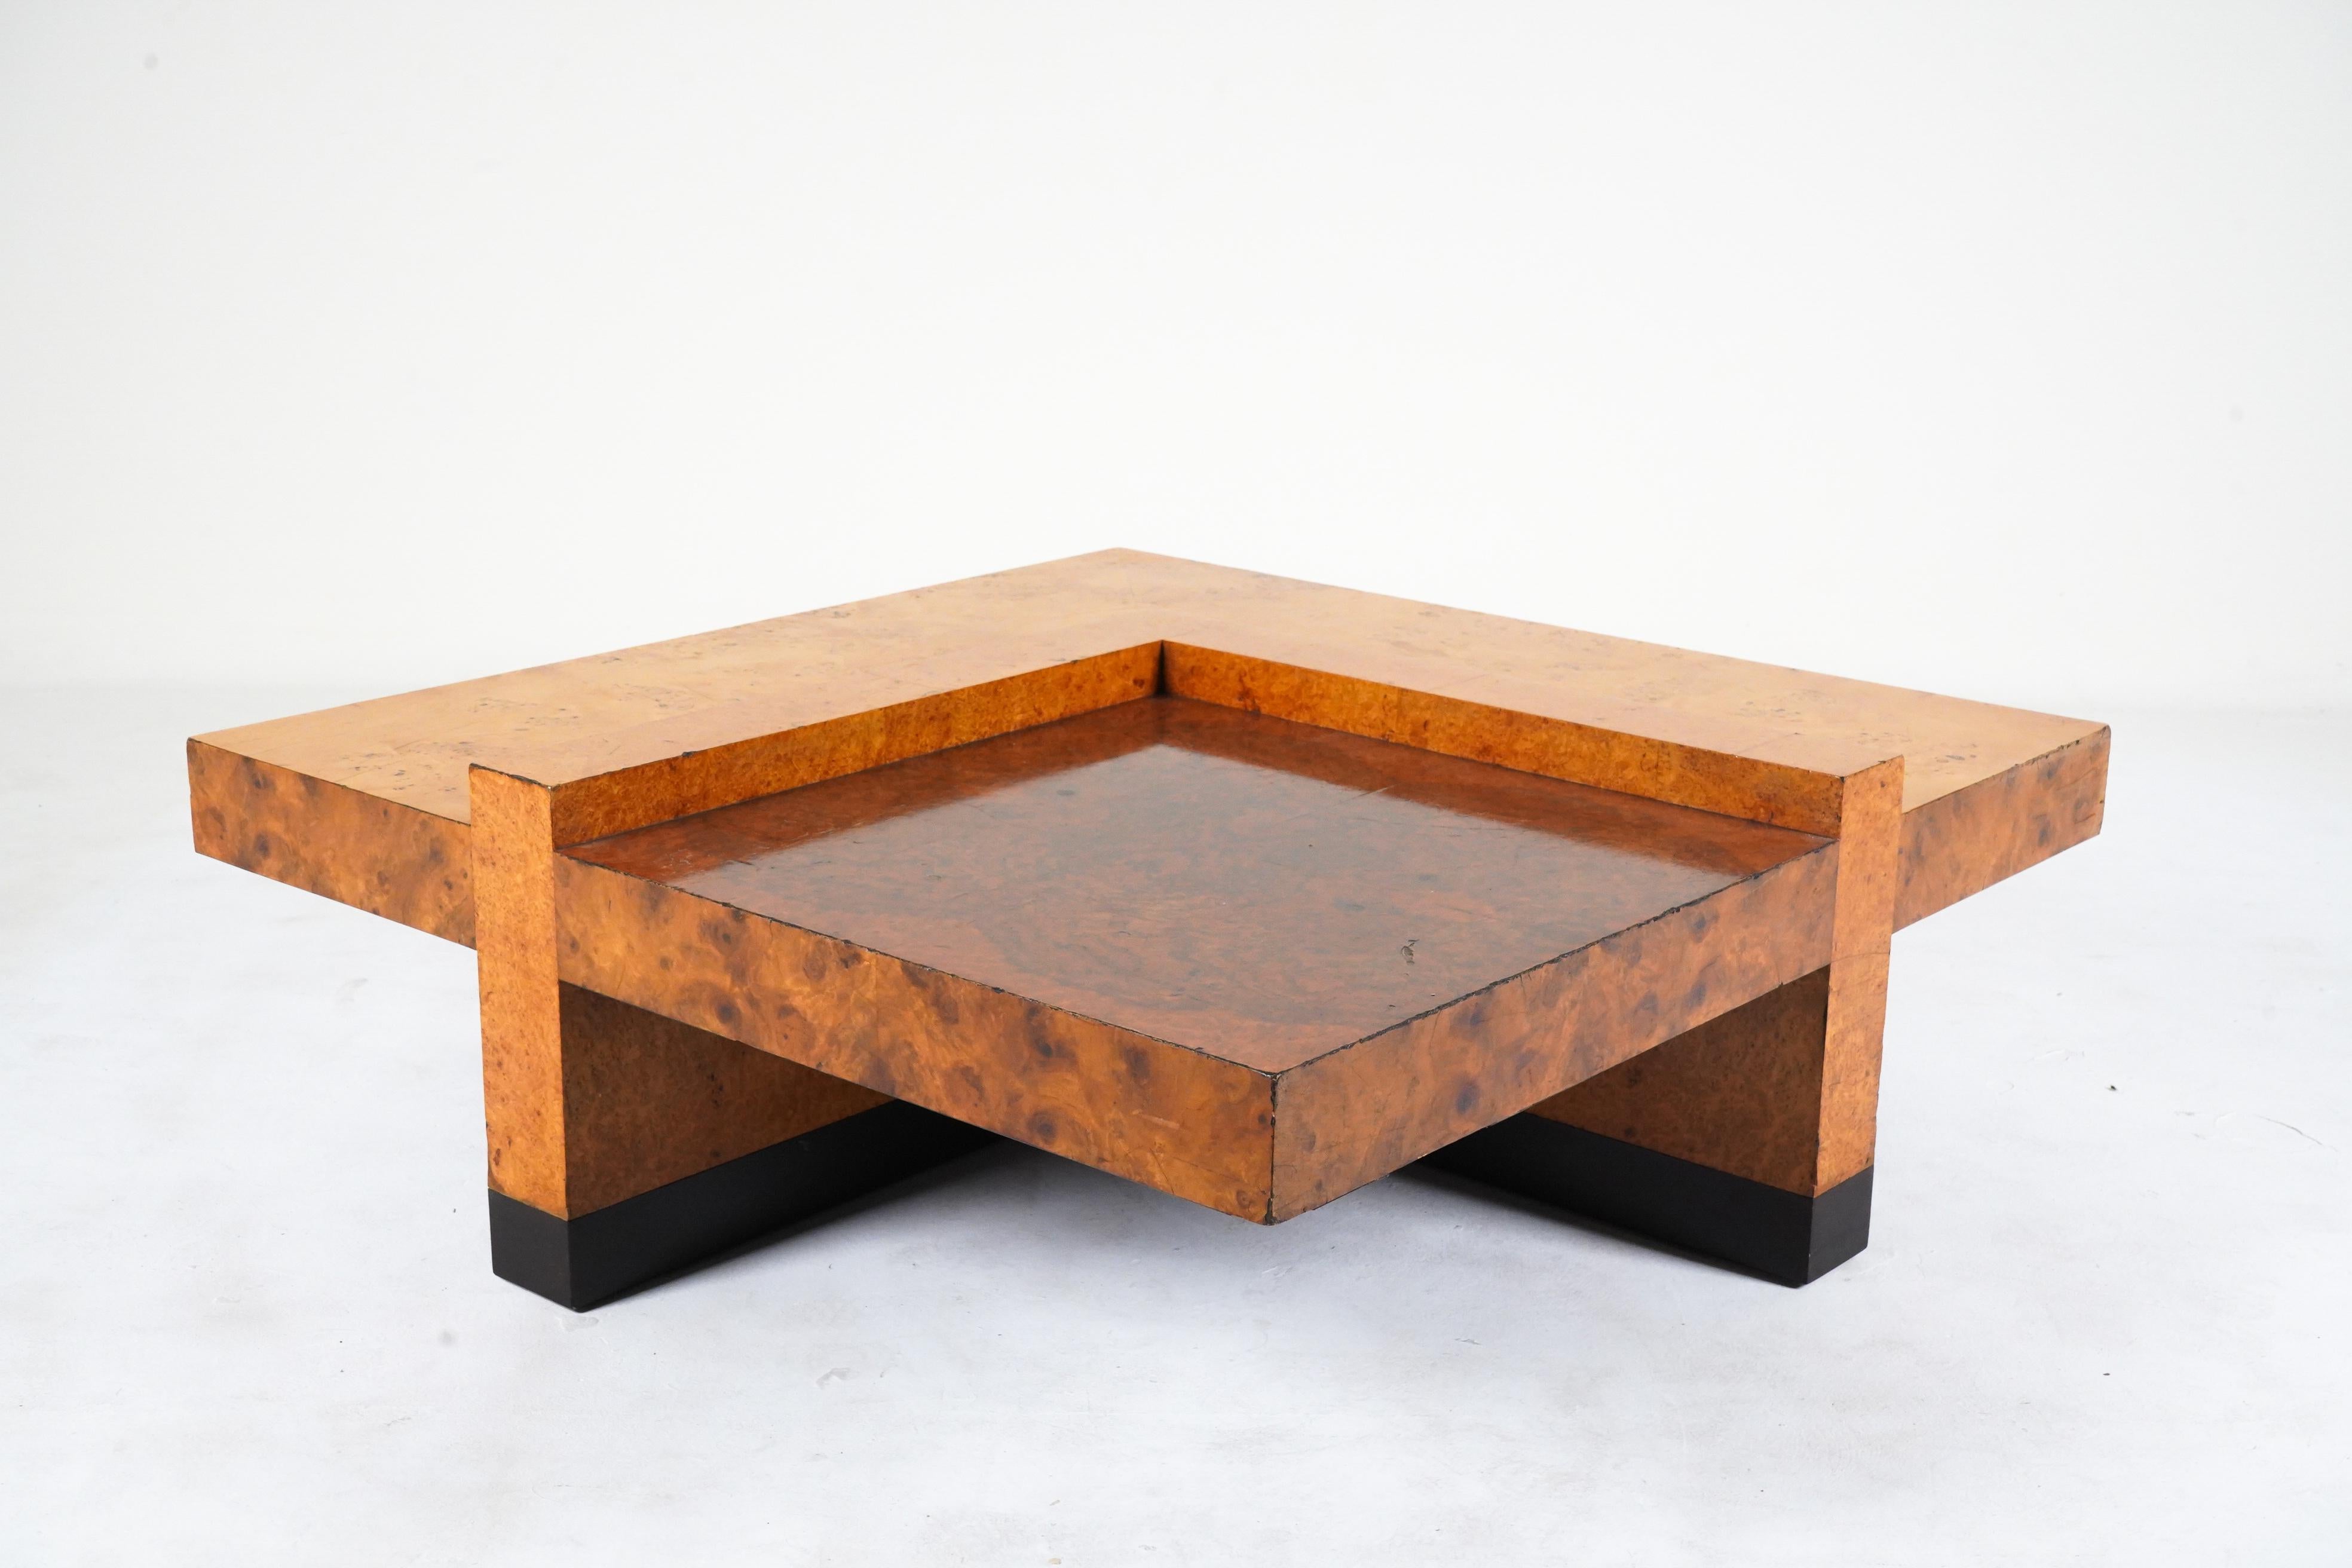 An Italian mid-century coffee table made from burlwood veneer in contrasting shades. The burl is very thick and secure and the design is rare. Condition is vintage -with expected scratches, minor chips and imperfections. There are no significant